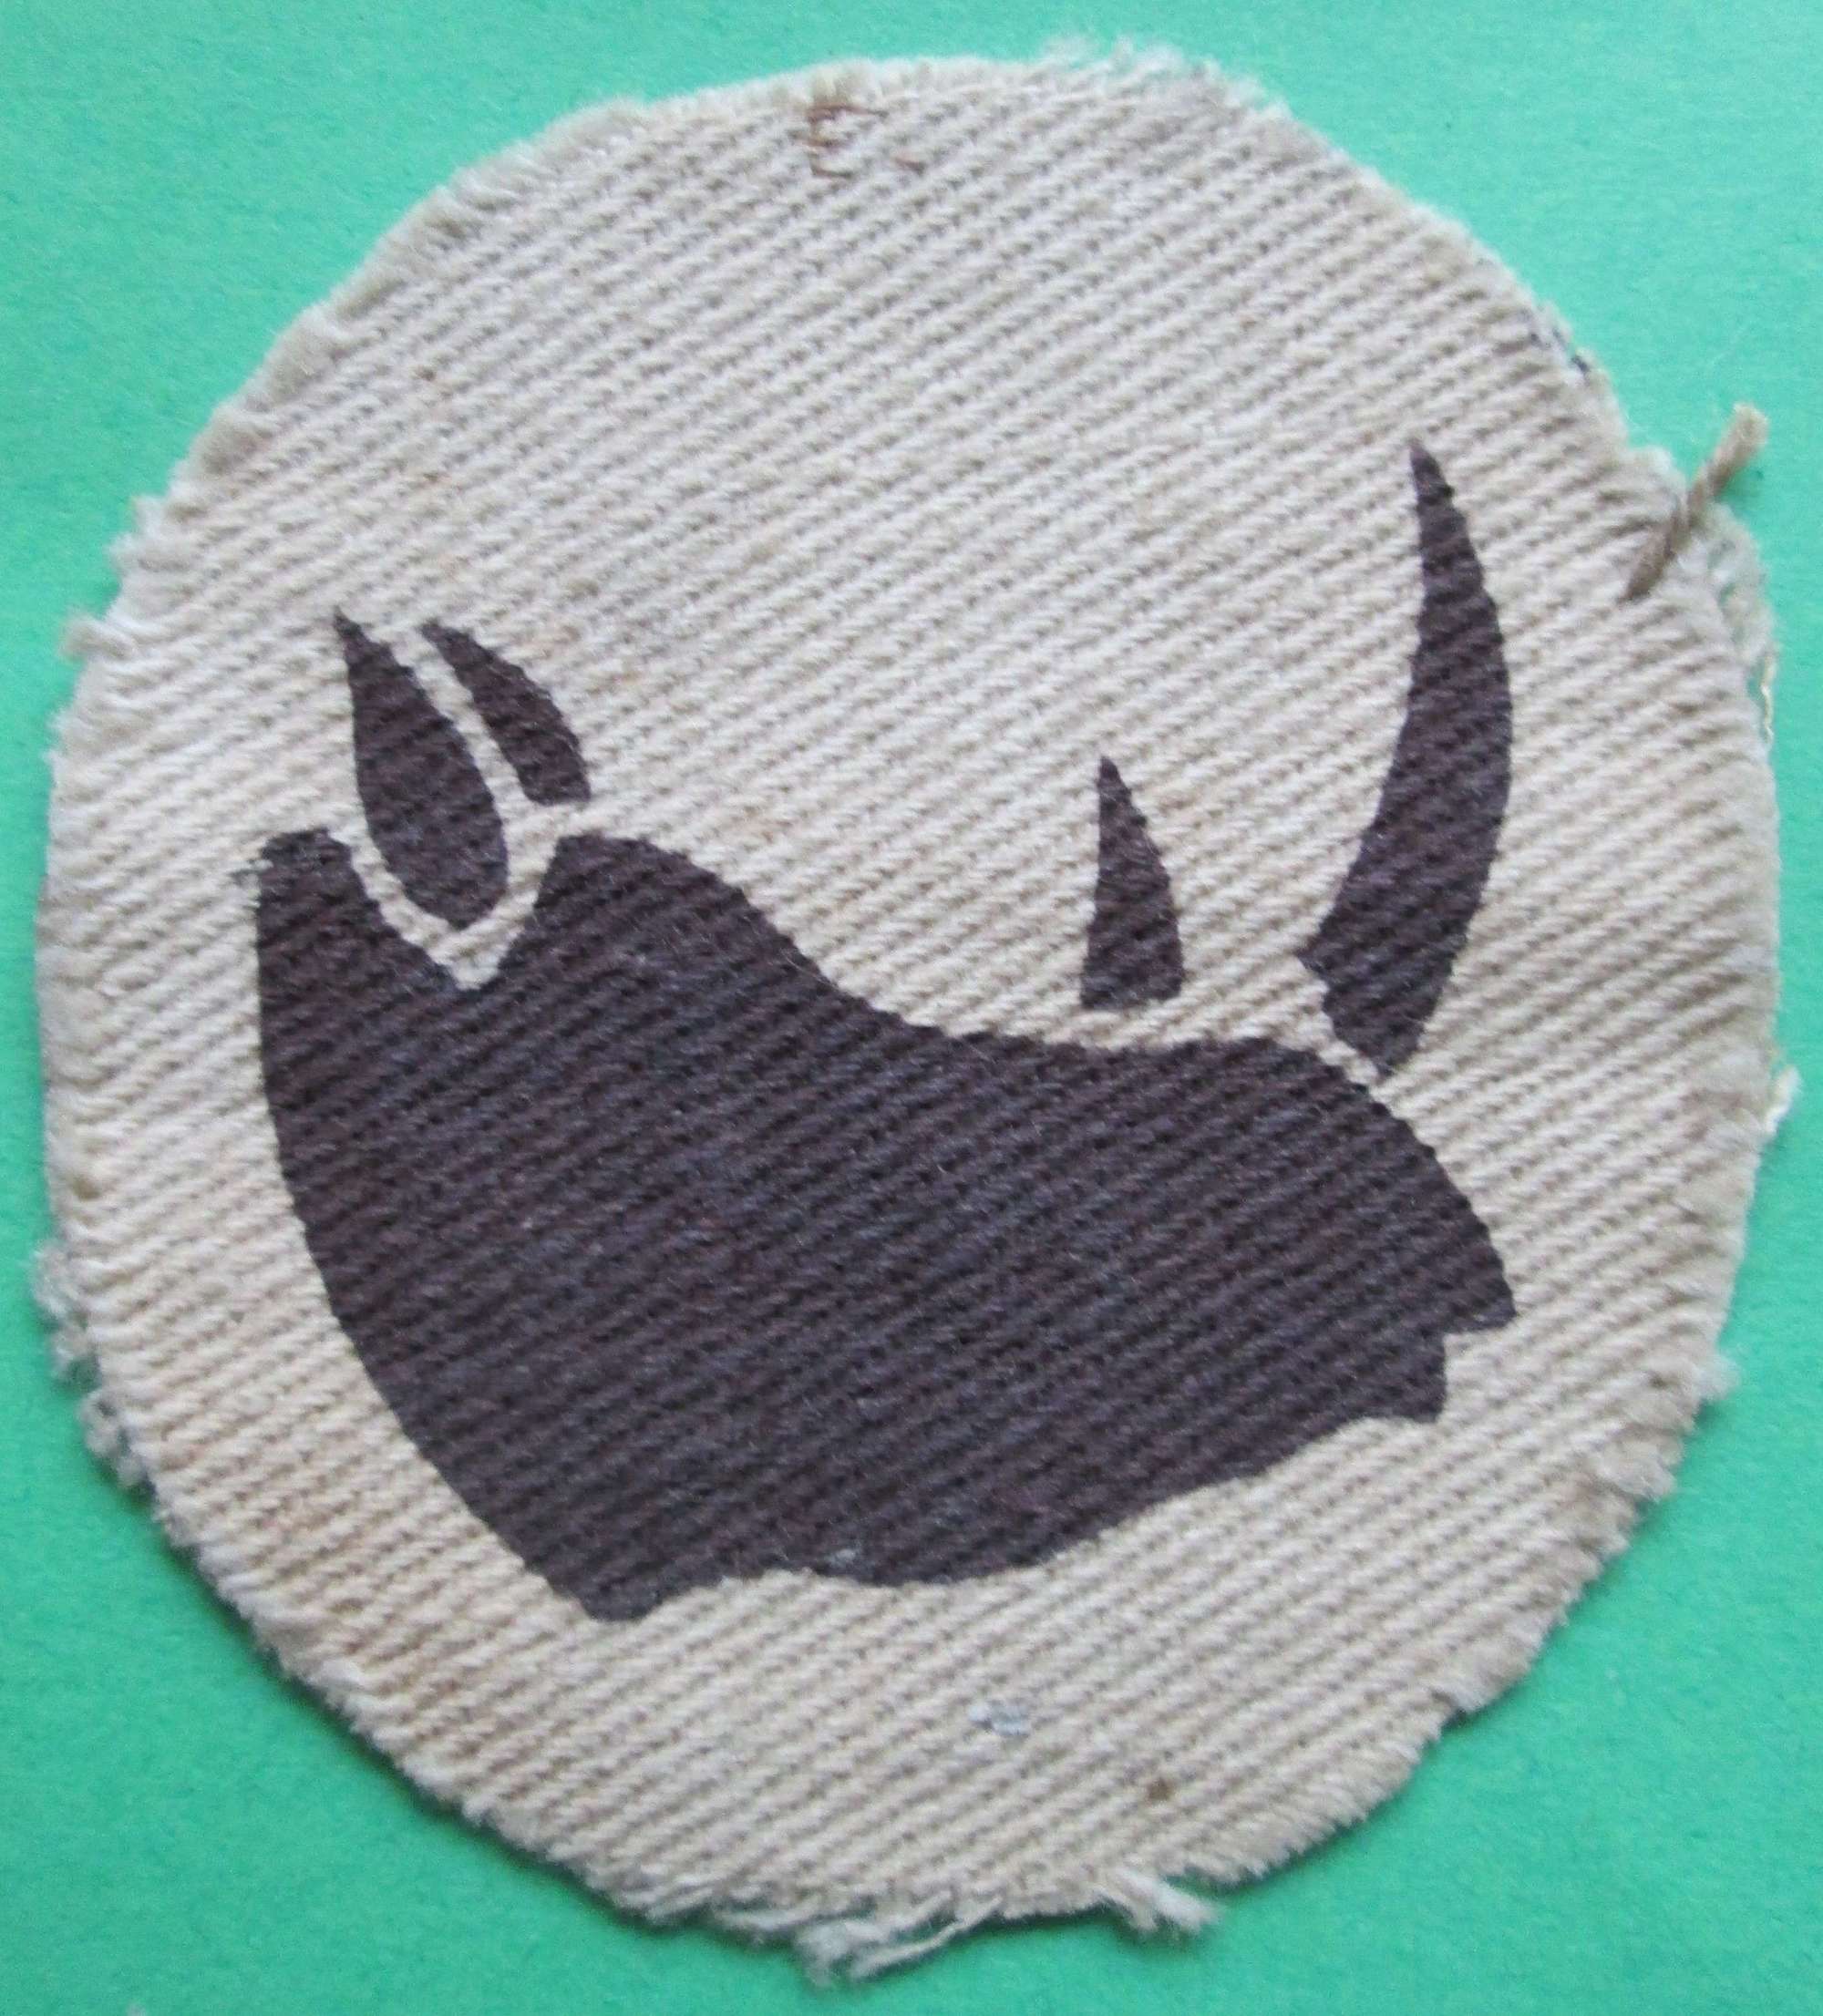 A SCARCE WWII  11 (EAST AFRICAN ) DIVISION PATCH